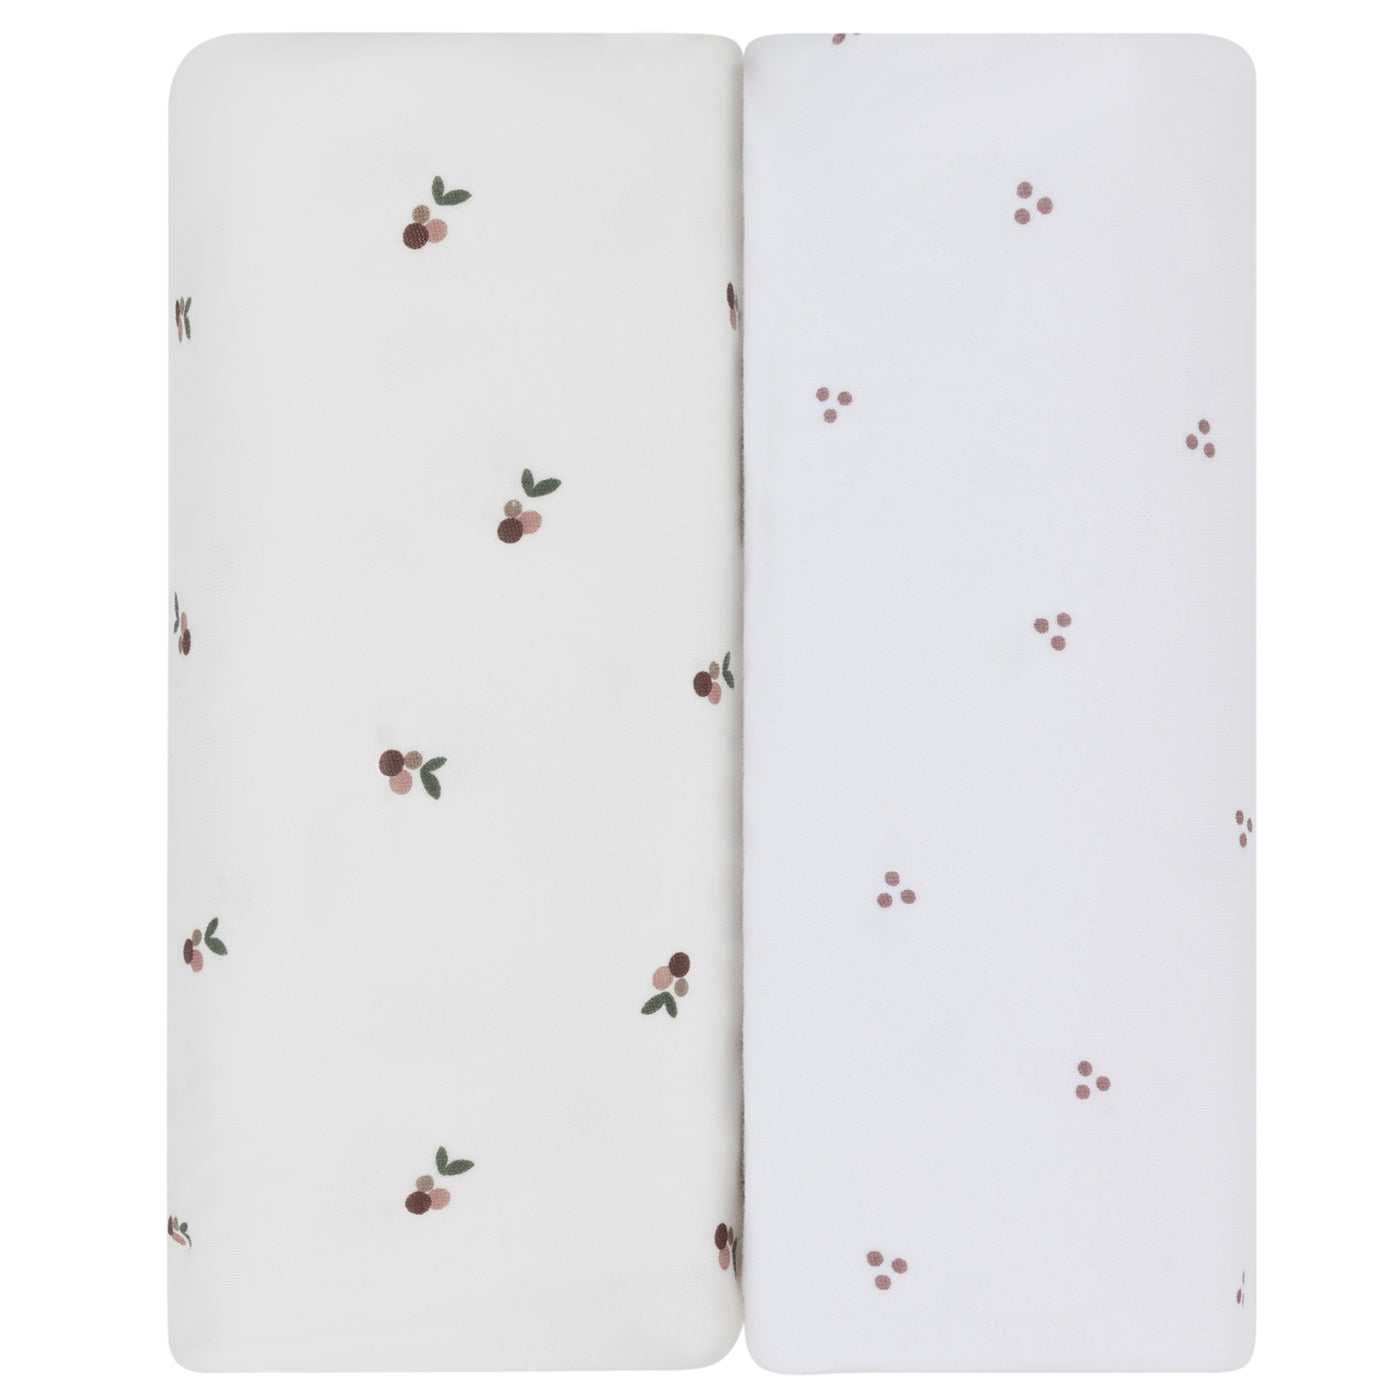 Ely's & Co. Waterproof Two Pack Portable Crib / Pack N Play Sheets - Plum Berry Collection